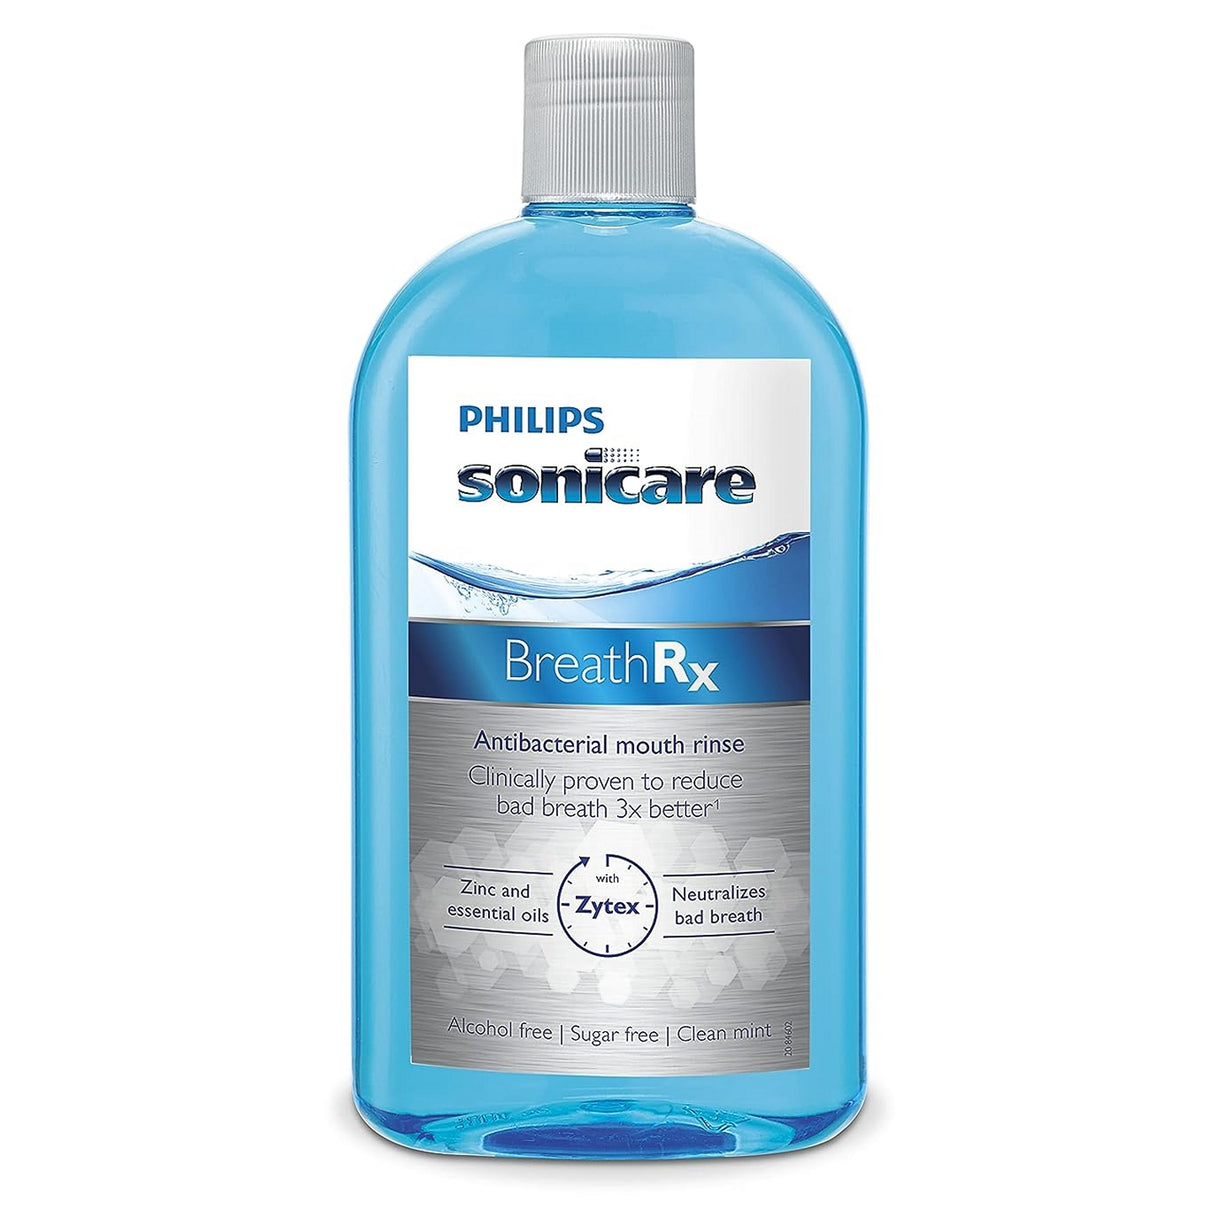 Philips Sonicare BreathRx Antibacterial Mouth Rinse 237ml - Whiter Smile